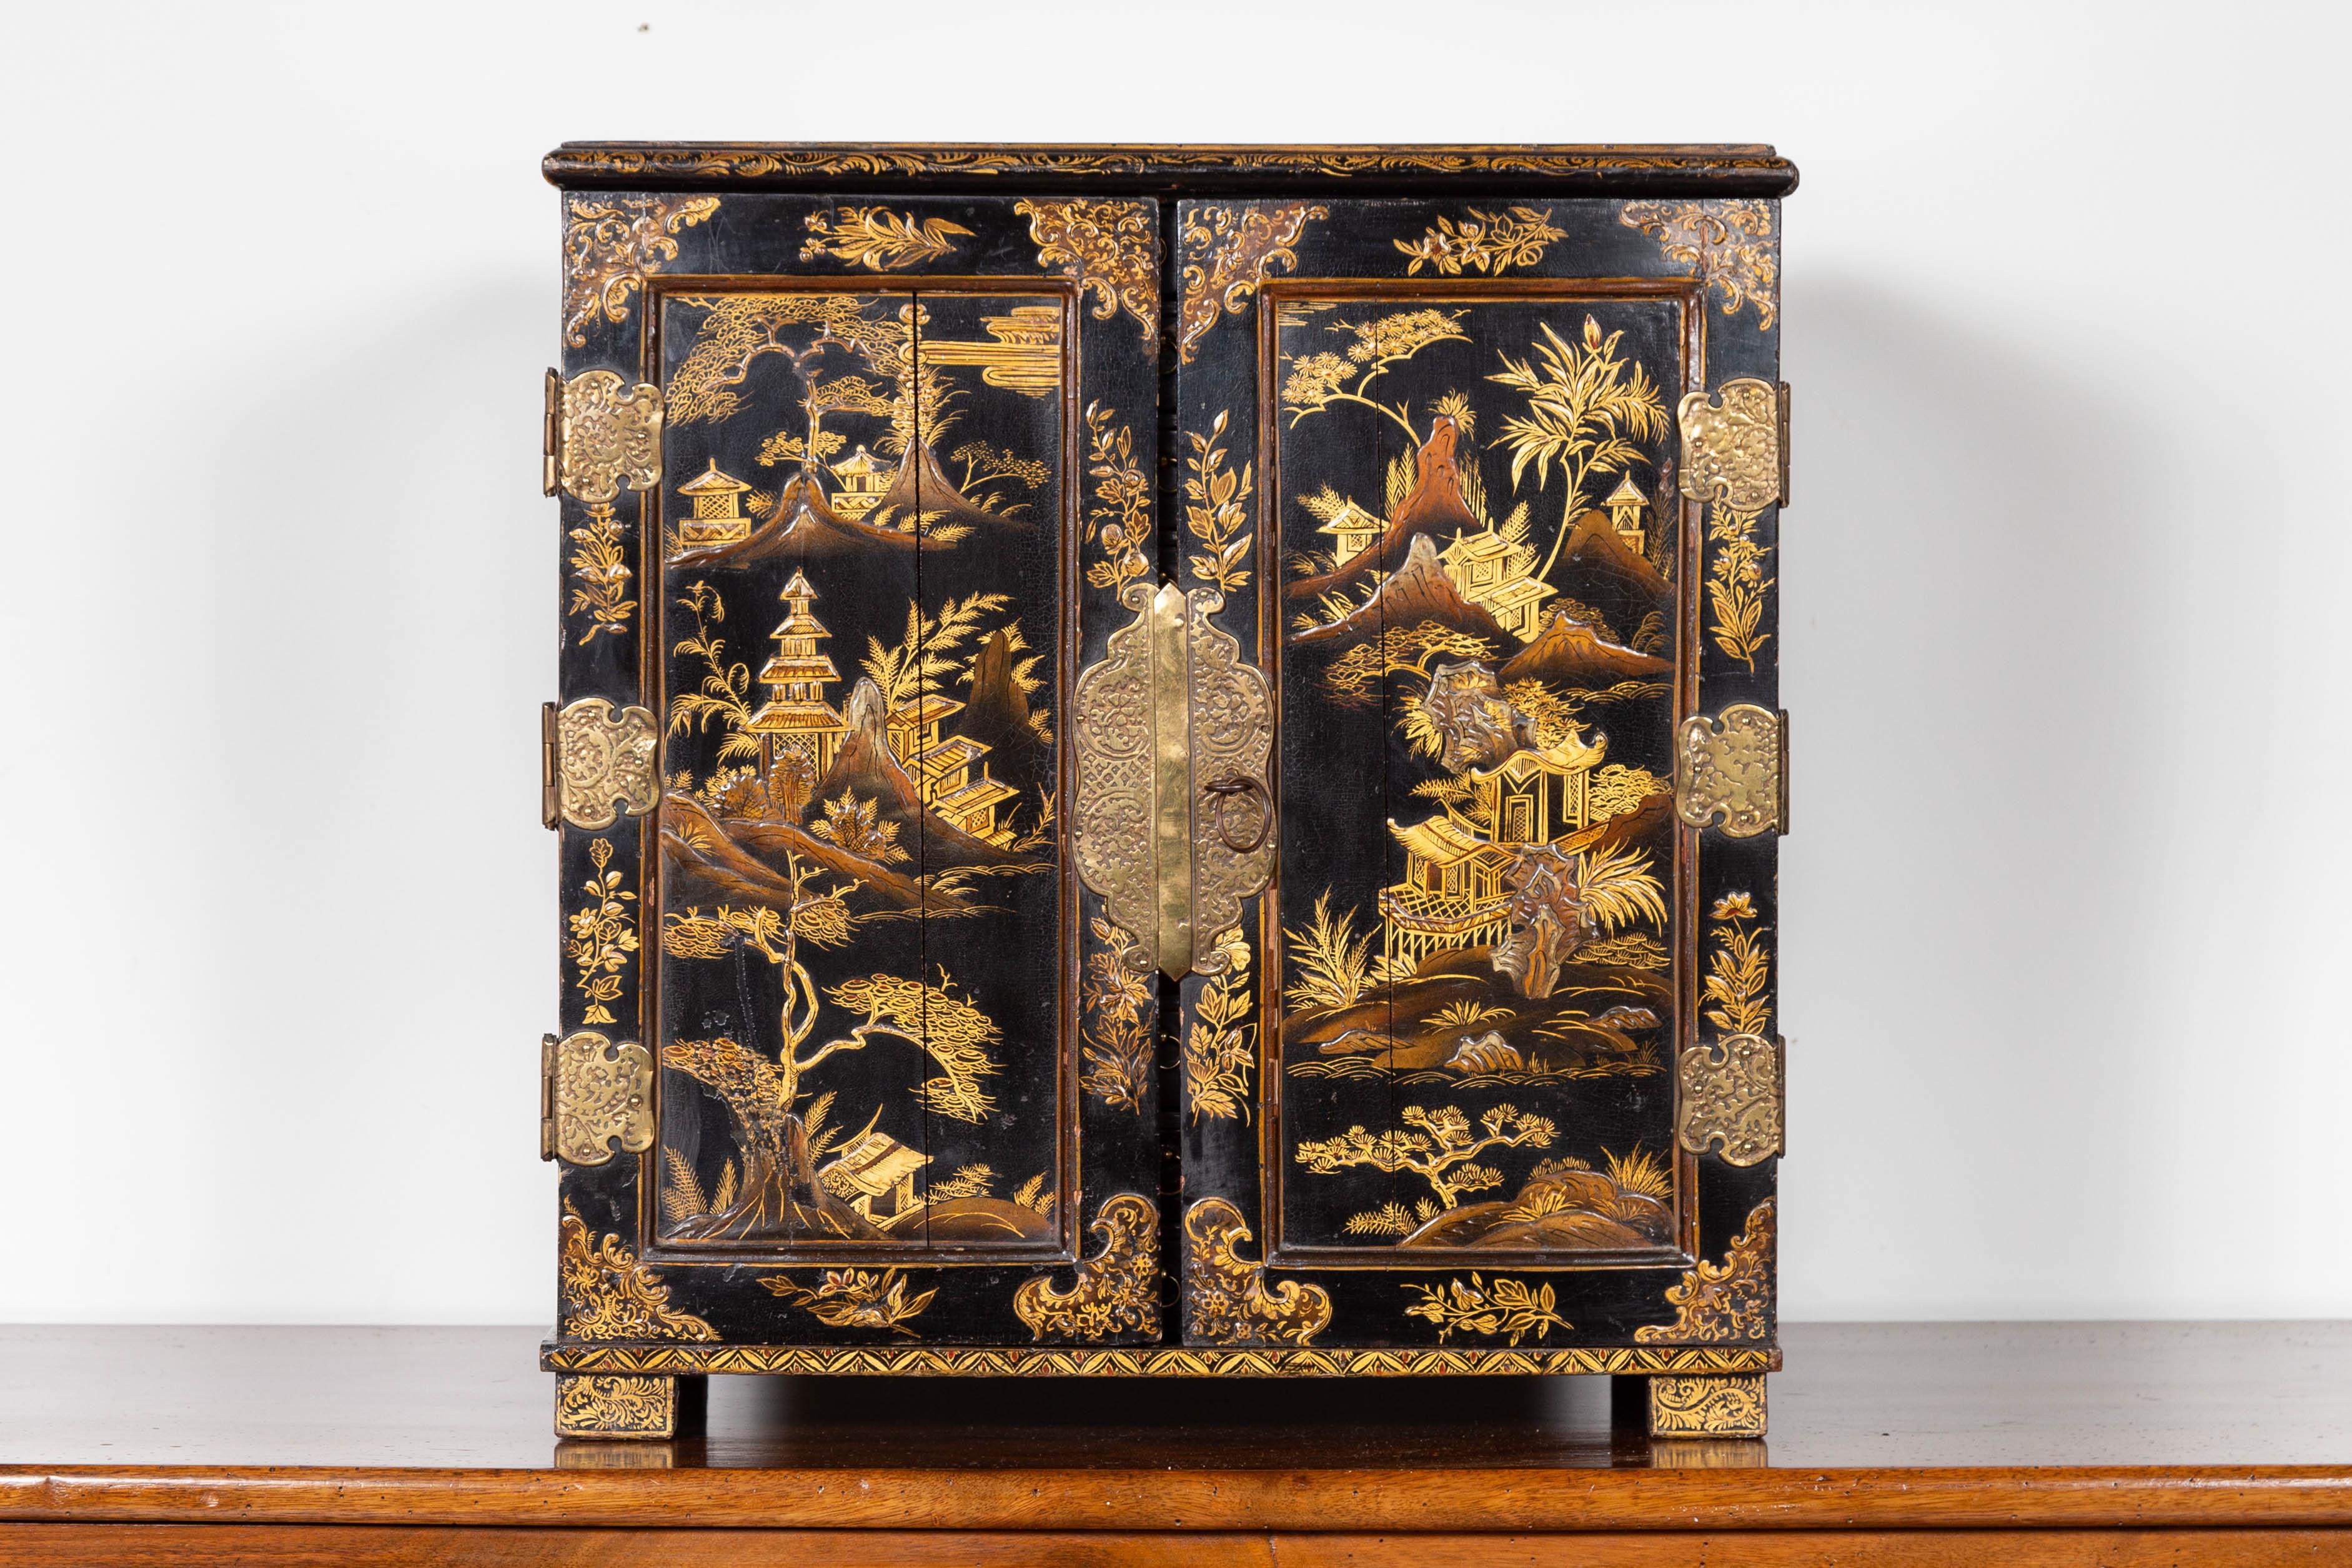 An English black and gold chinoiserie small cabinet from the late 19th century, with 10 inner drawers. Born in England during the last decade of the 19th century, this small cabinet features a black lacquered silhouette, adorned with a golden